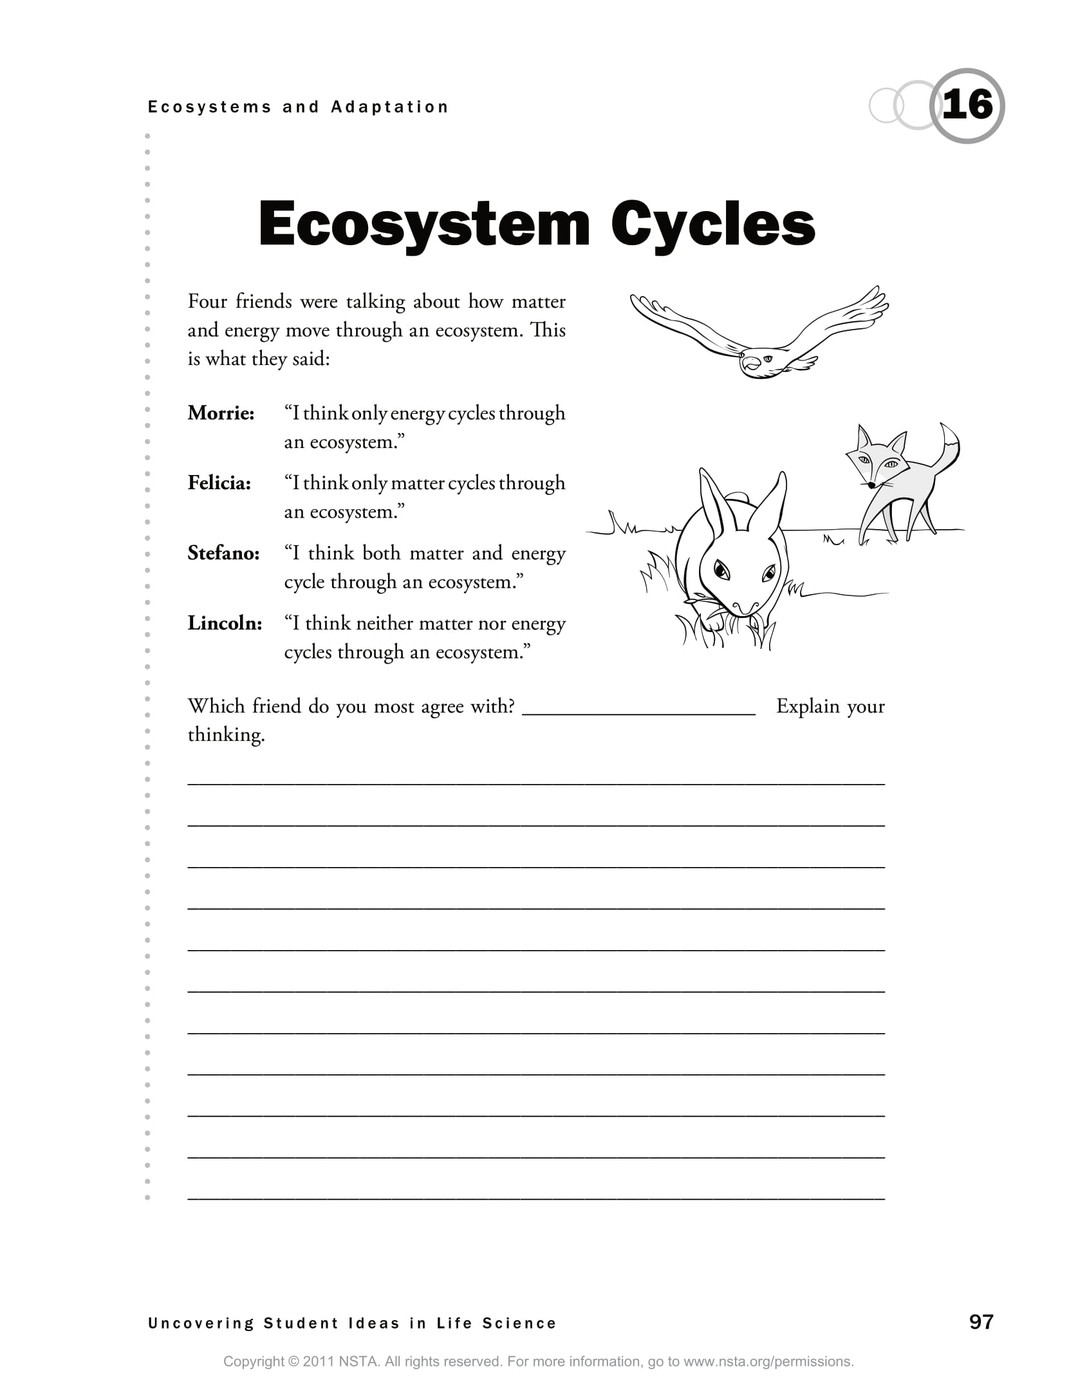 Ecosystem Cycles